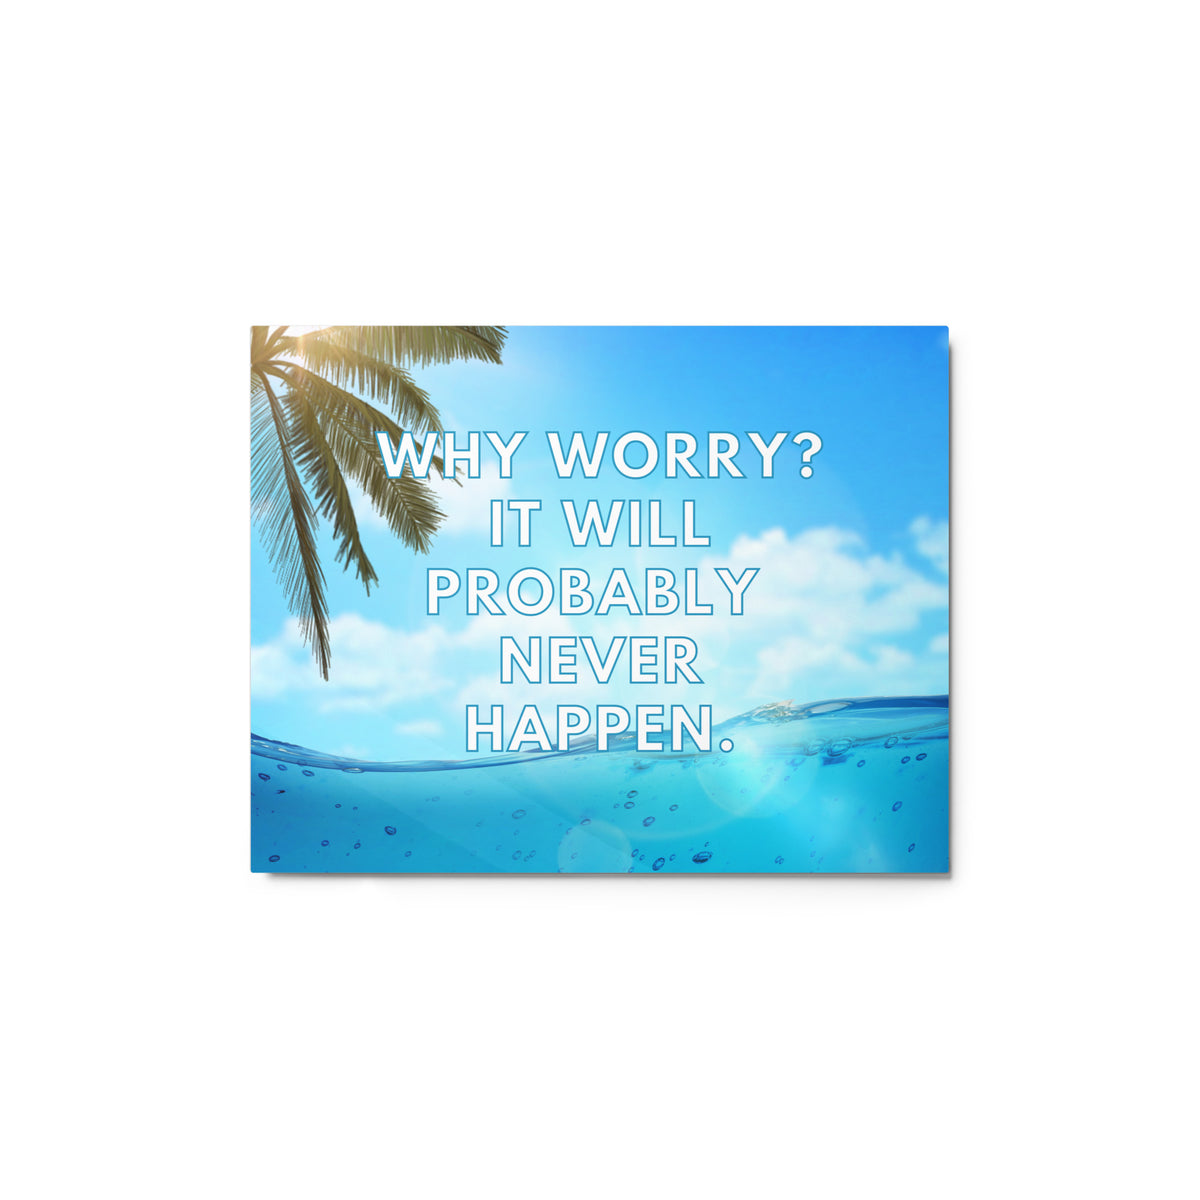 Why Worry? It Will Probably Never Happen | Inspirational Wall Art | Glossy Metal Print  Success Acceleration Tools